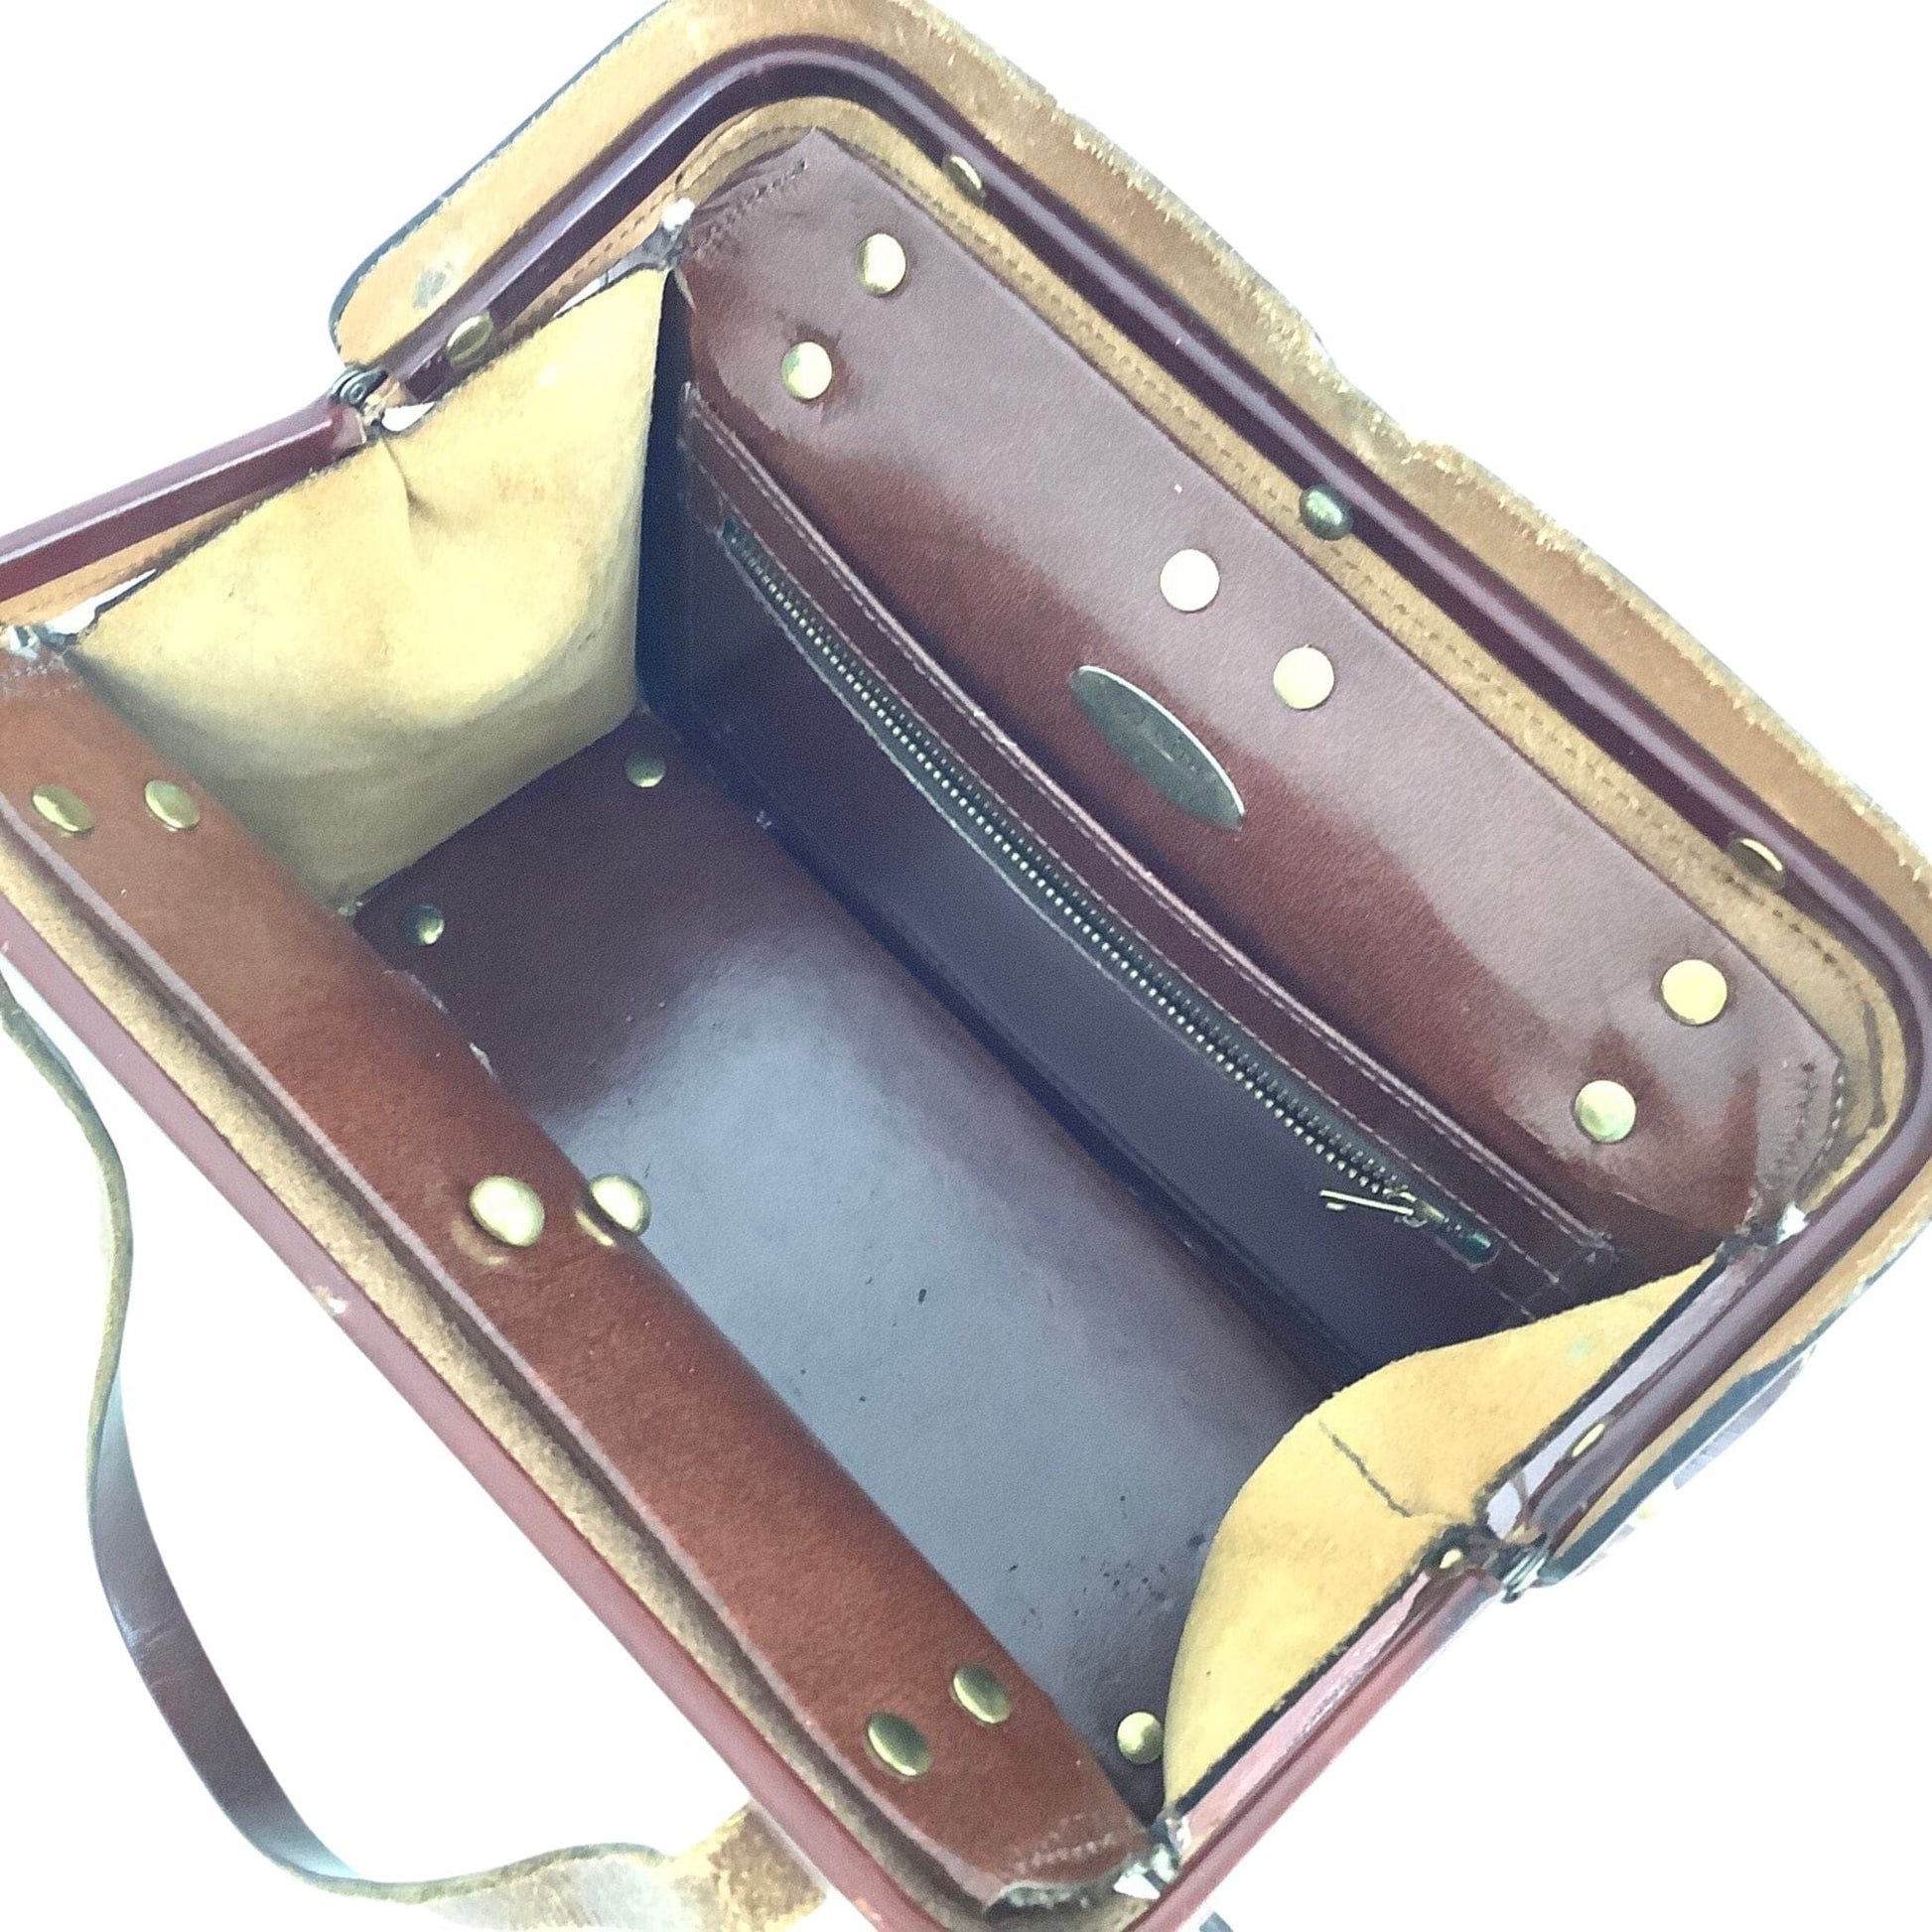 Zenith Equestrian Bag Multi / Mixed / Vintage 1950s